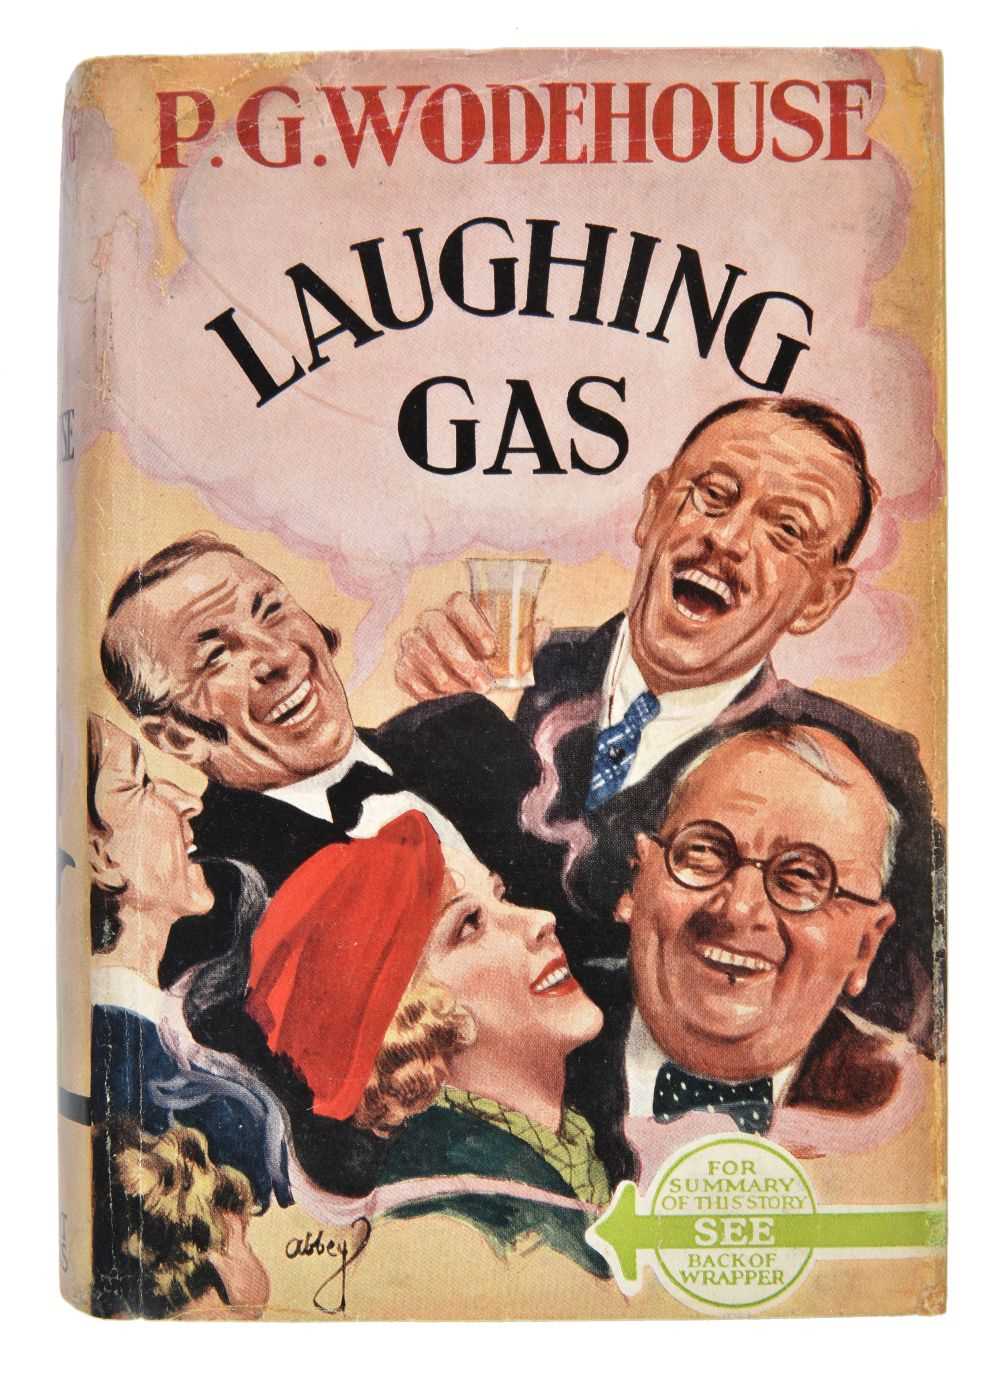 Lot 761 - Wodehouse (P.G.) Laughing Gas, 1st edition, 1936